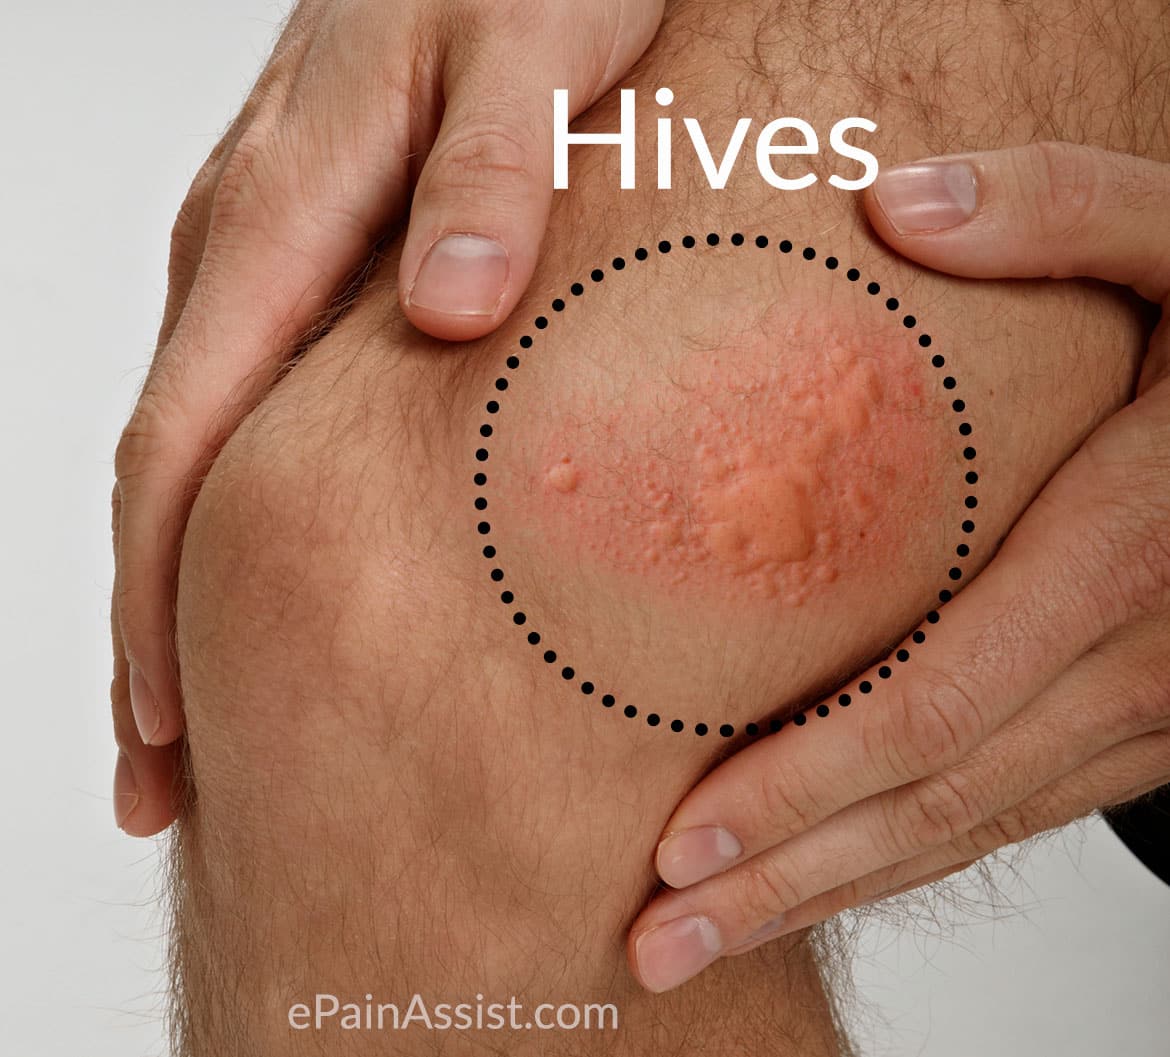 Hives &  Angioedema: Treatment, Home Remedies, Prevention, Causes